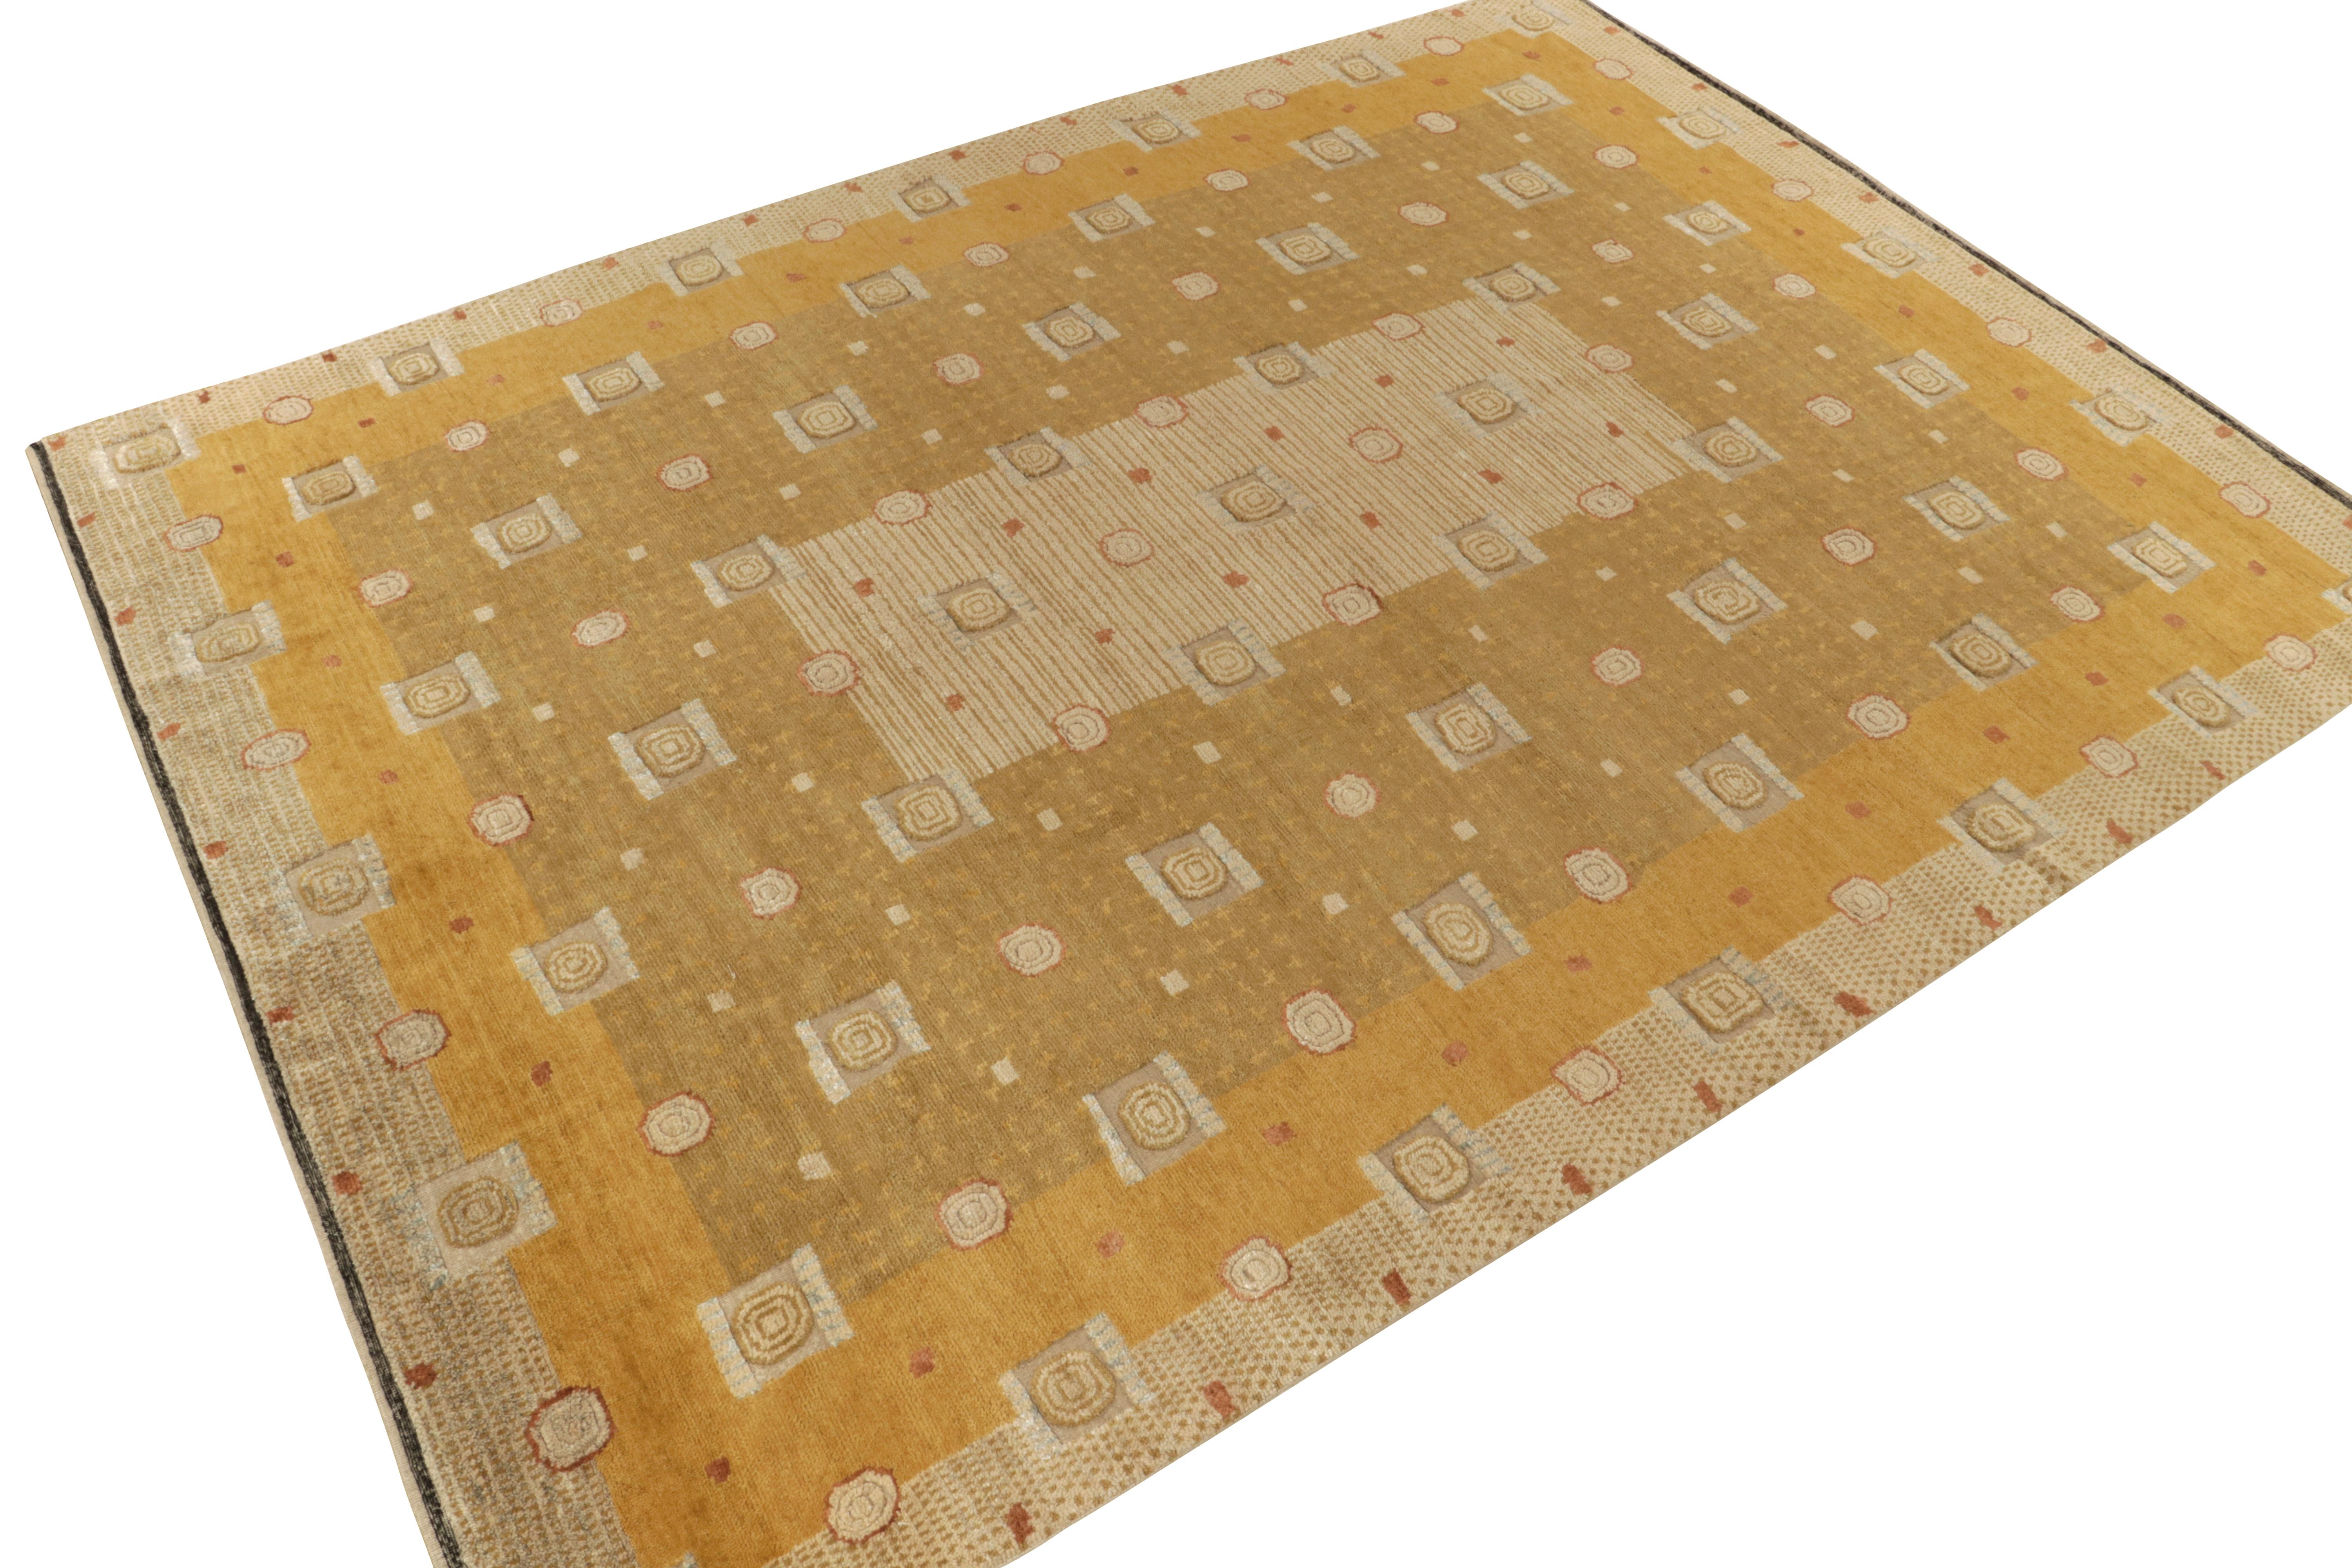 A 10x14 ode to celebrated Art Deco rug styles, from Rug & Kilim’s Deco Collection. Hand knotted in wool, marrying dynamic high-low pile textures with geometric patterns in gold and beige-brown hues. Crisp white accents bring out the graphic,